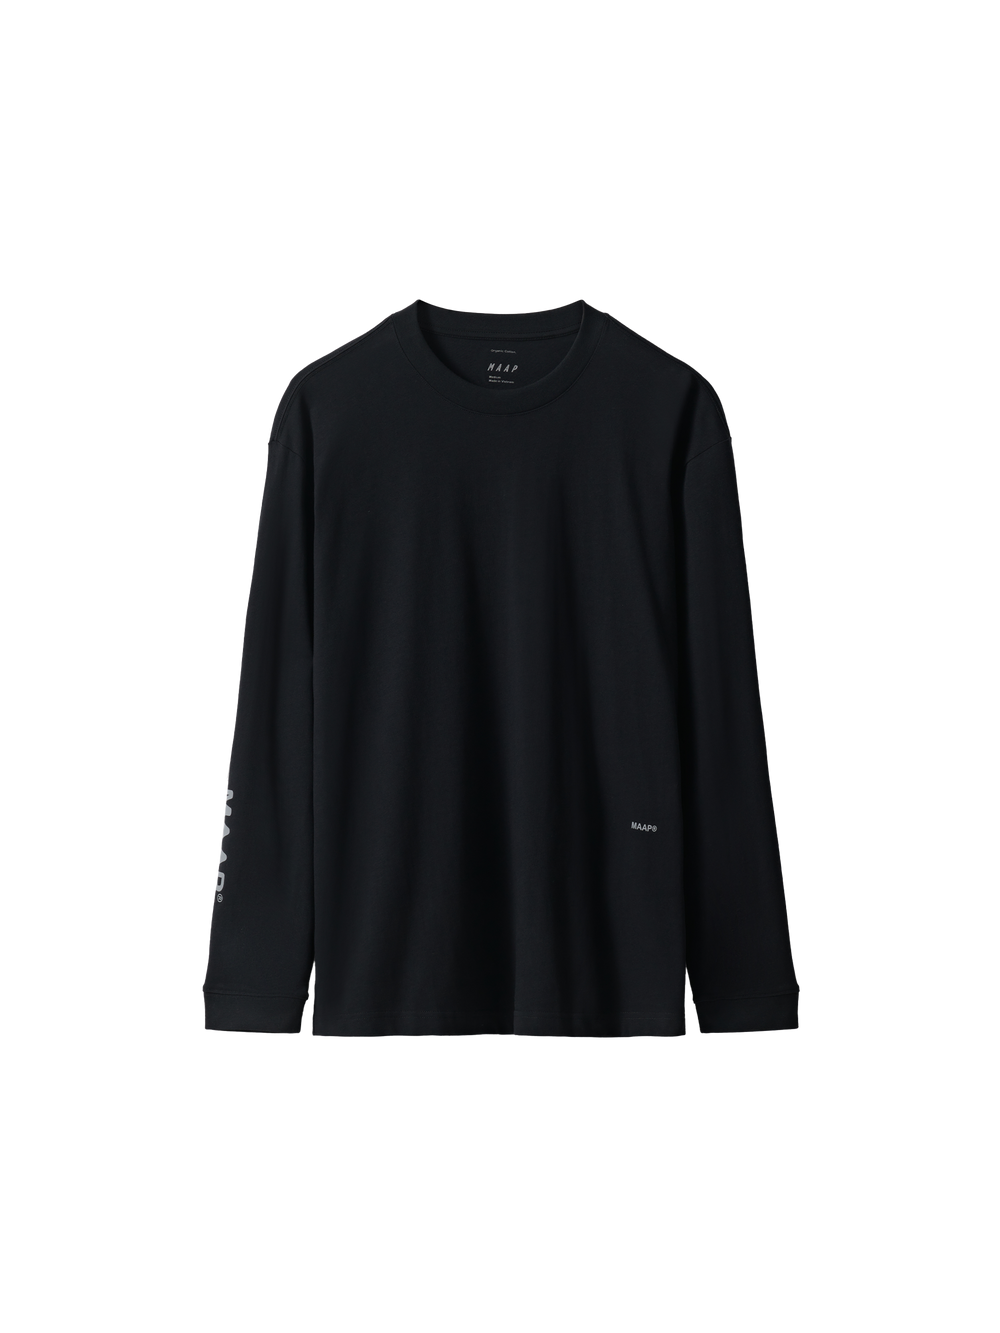 Product Image for Essentials LS Tee